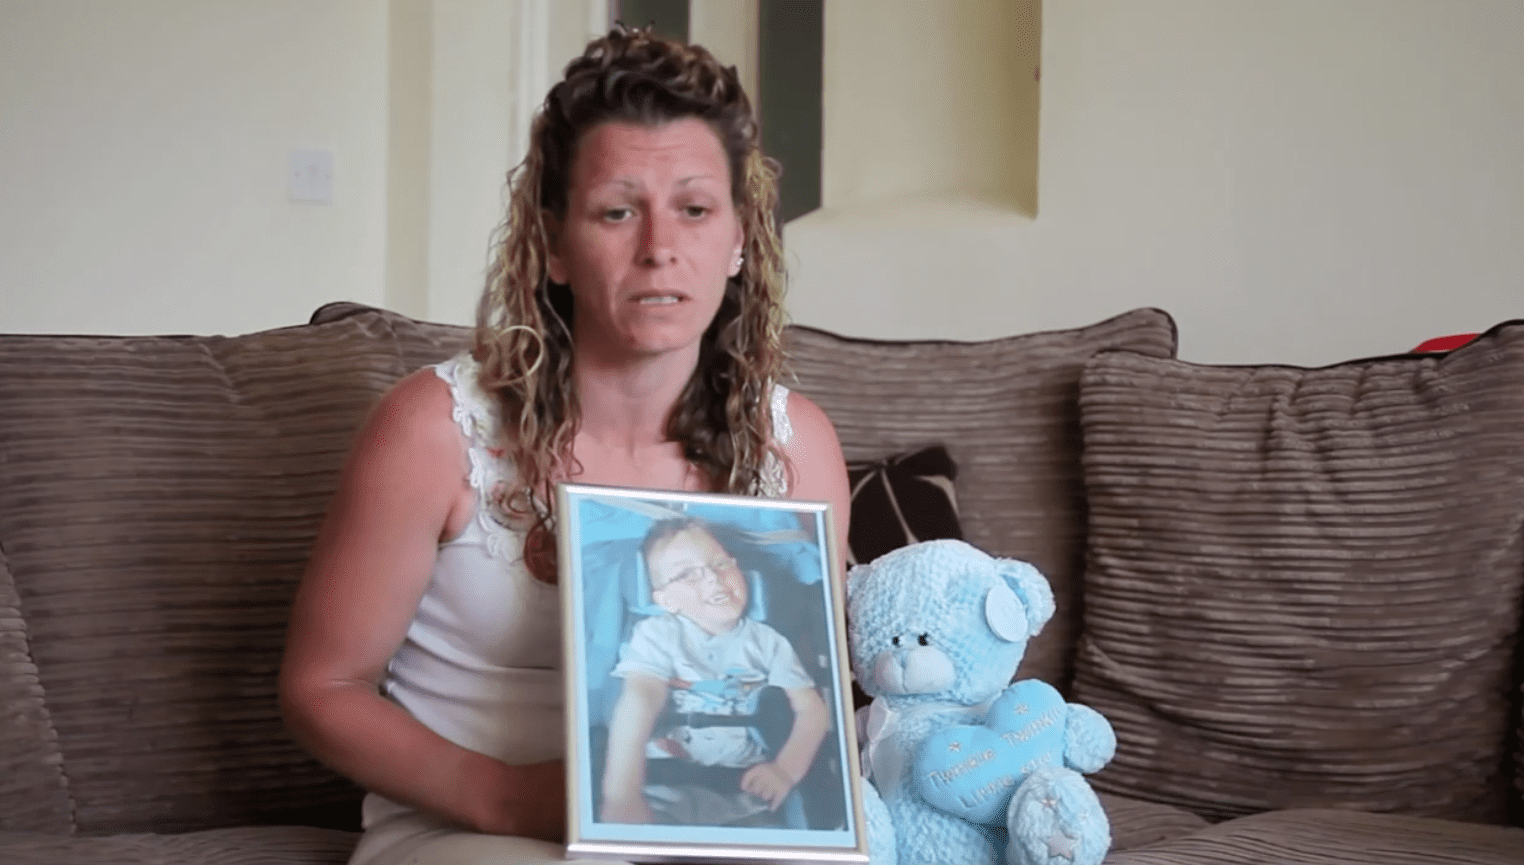 Jo Corbett-Weeks holding a photo of her late son, Maximus. | Source: dailymotion.com/SWNS